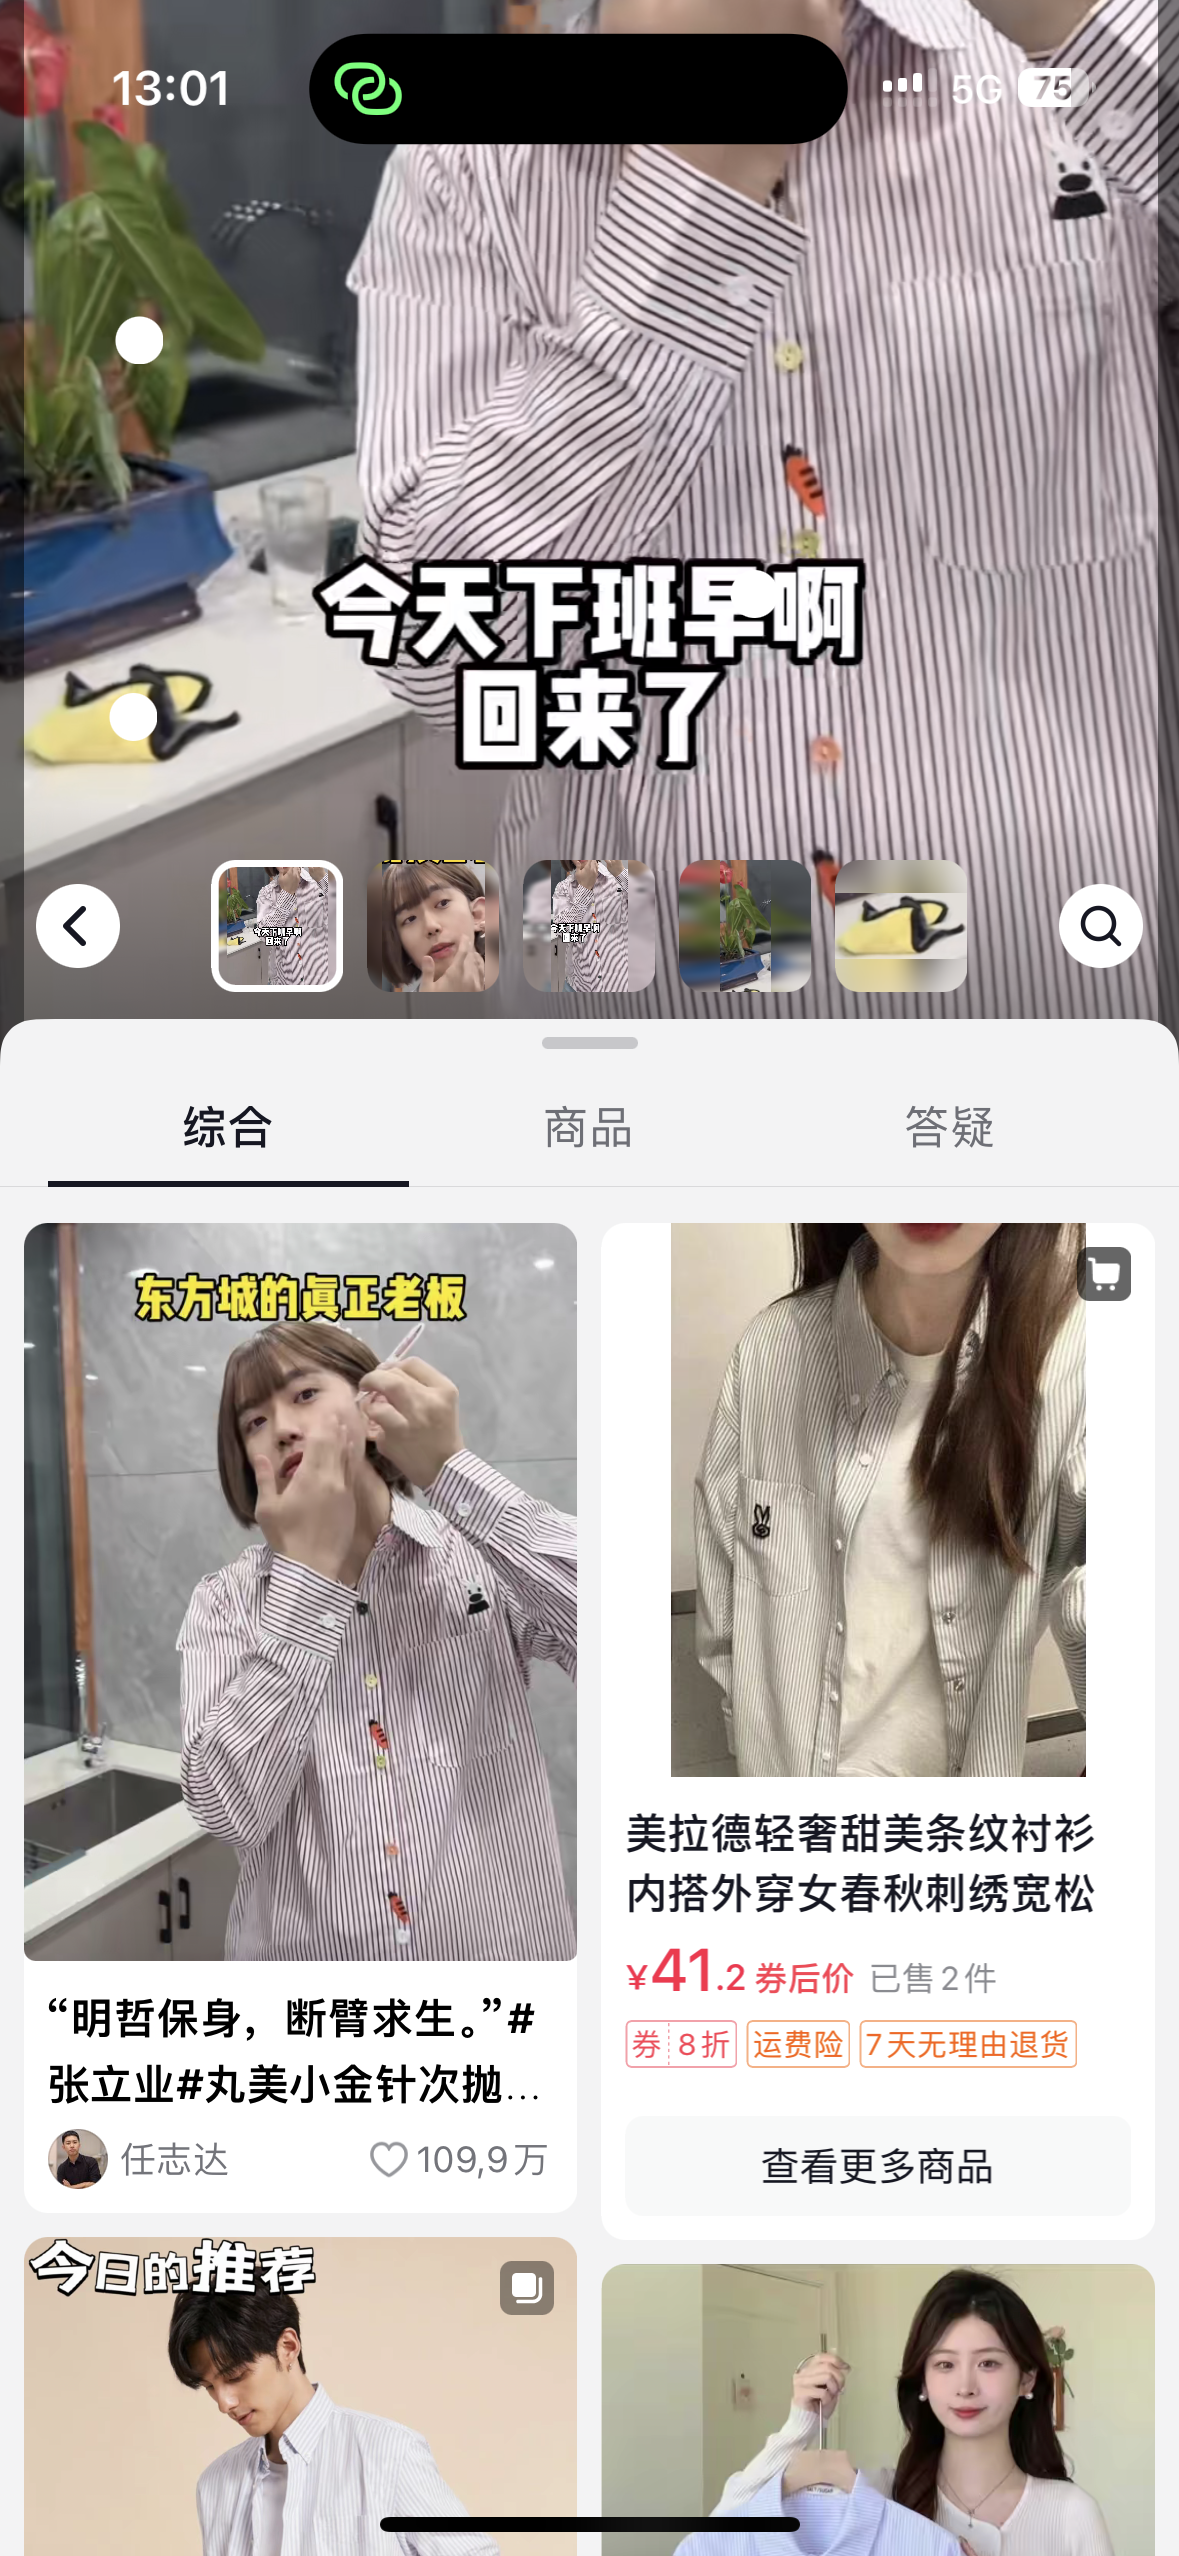 Recently, Douyin tested a new “worth watching” (值得看看) function. Image: Douyin